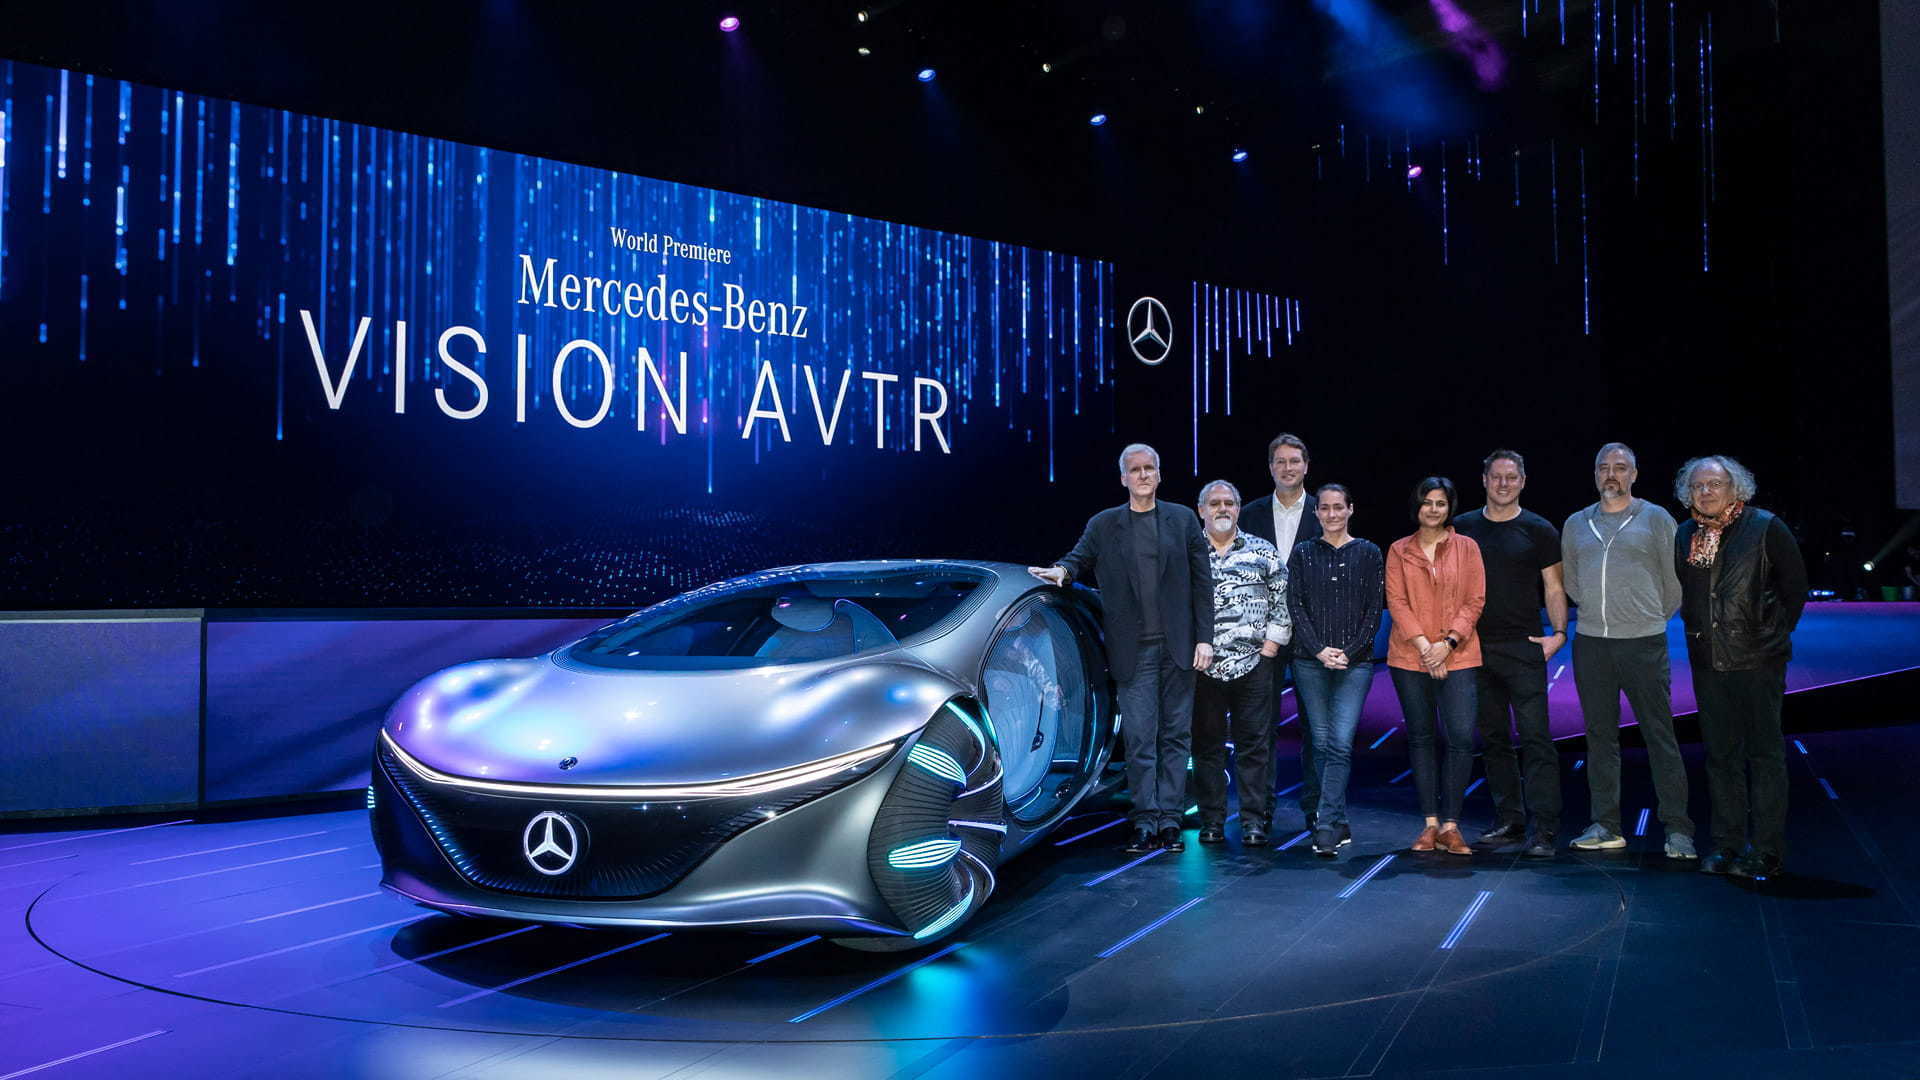 The Lightstorm and Mercedes-Benz teams pose with the VISION AVTR at CES 2020.